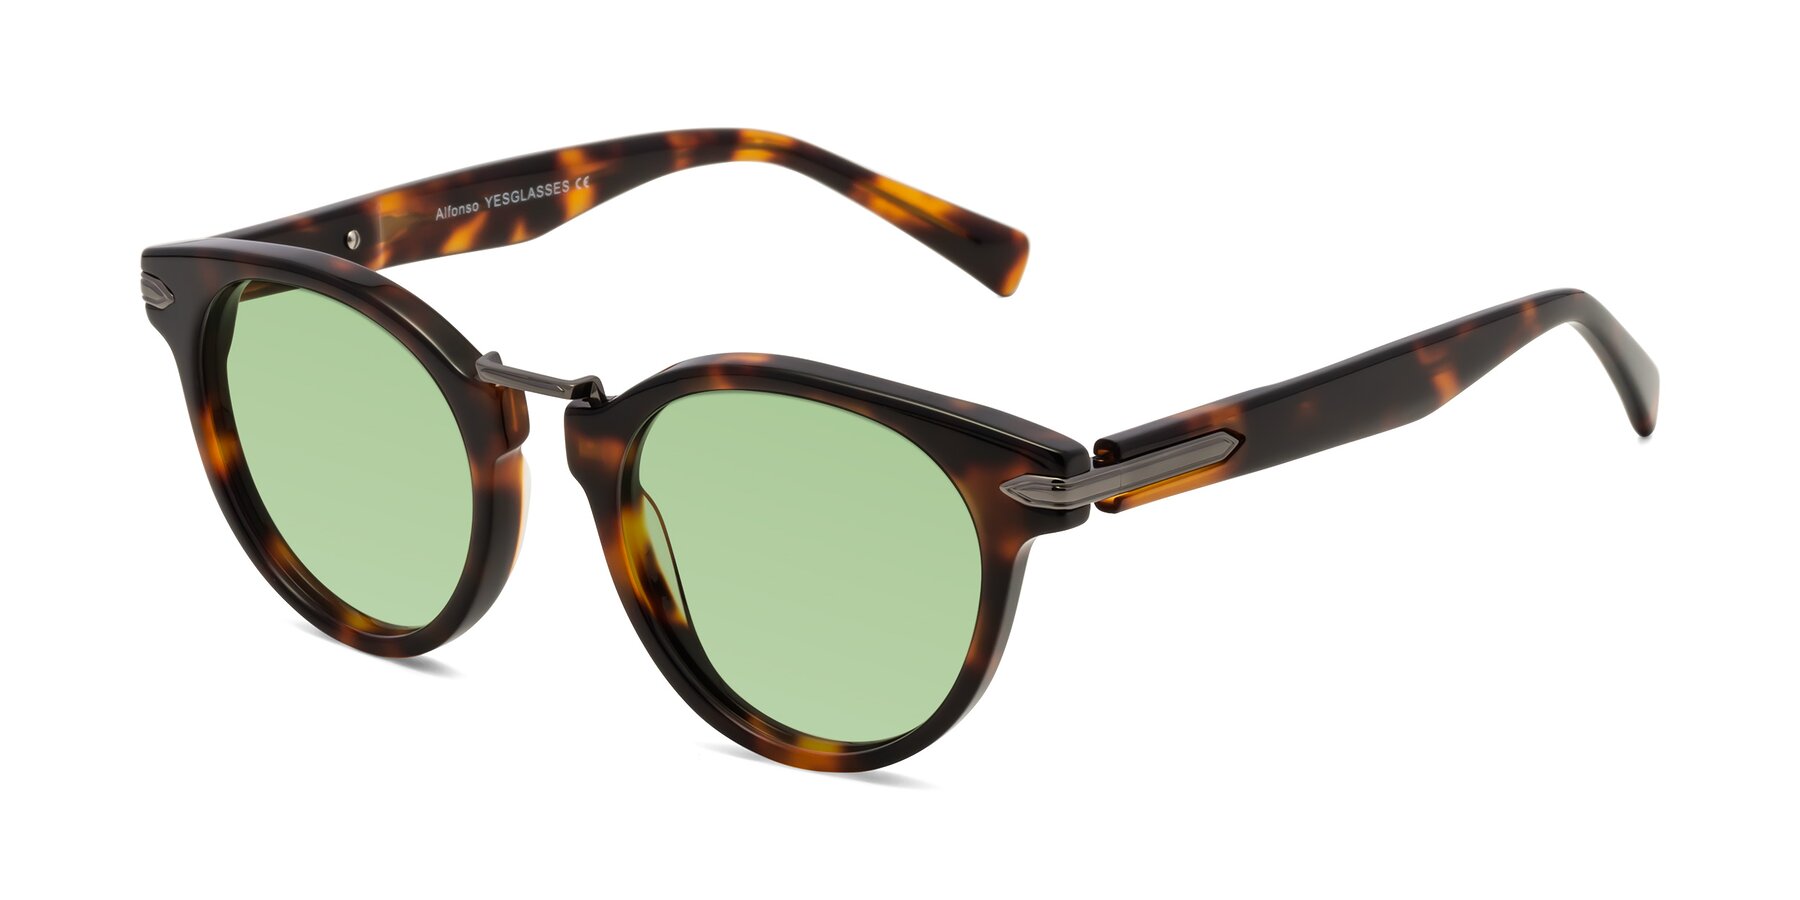 Angle of Alfonso in Tortoise with Medium Green Tinted Lenses